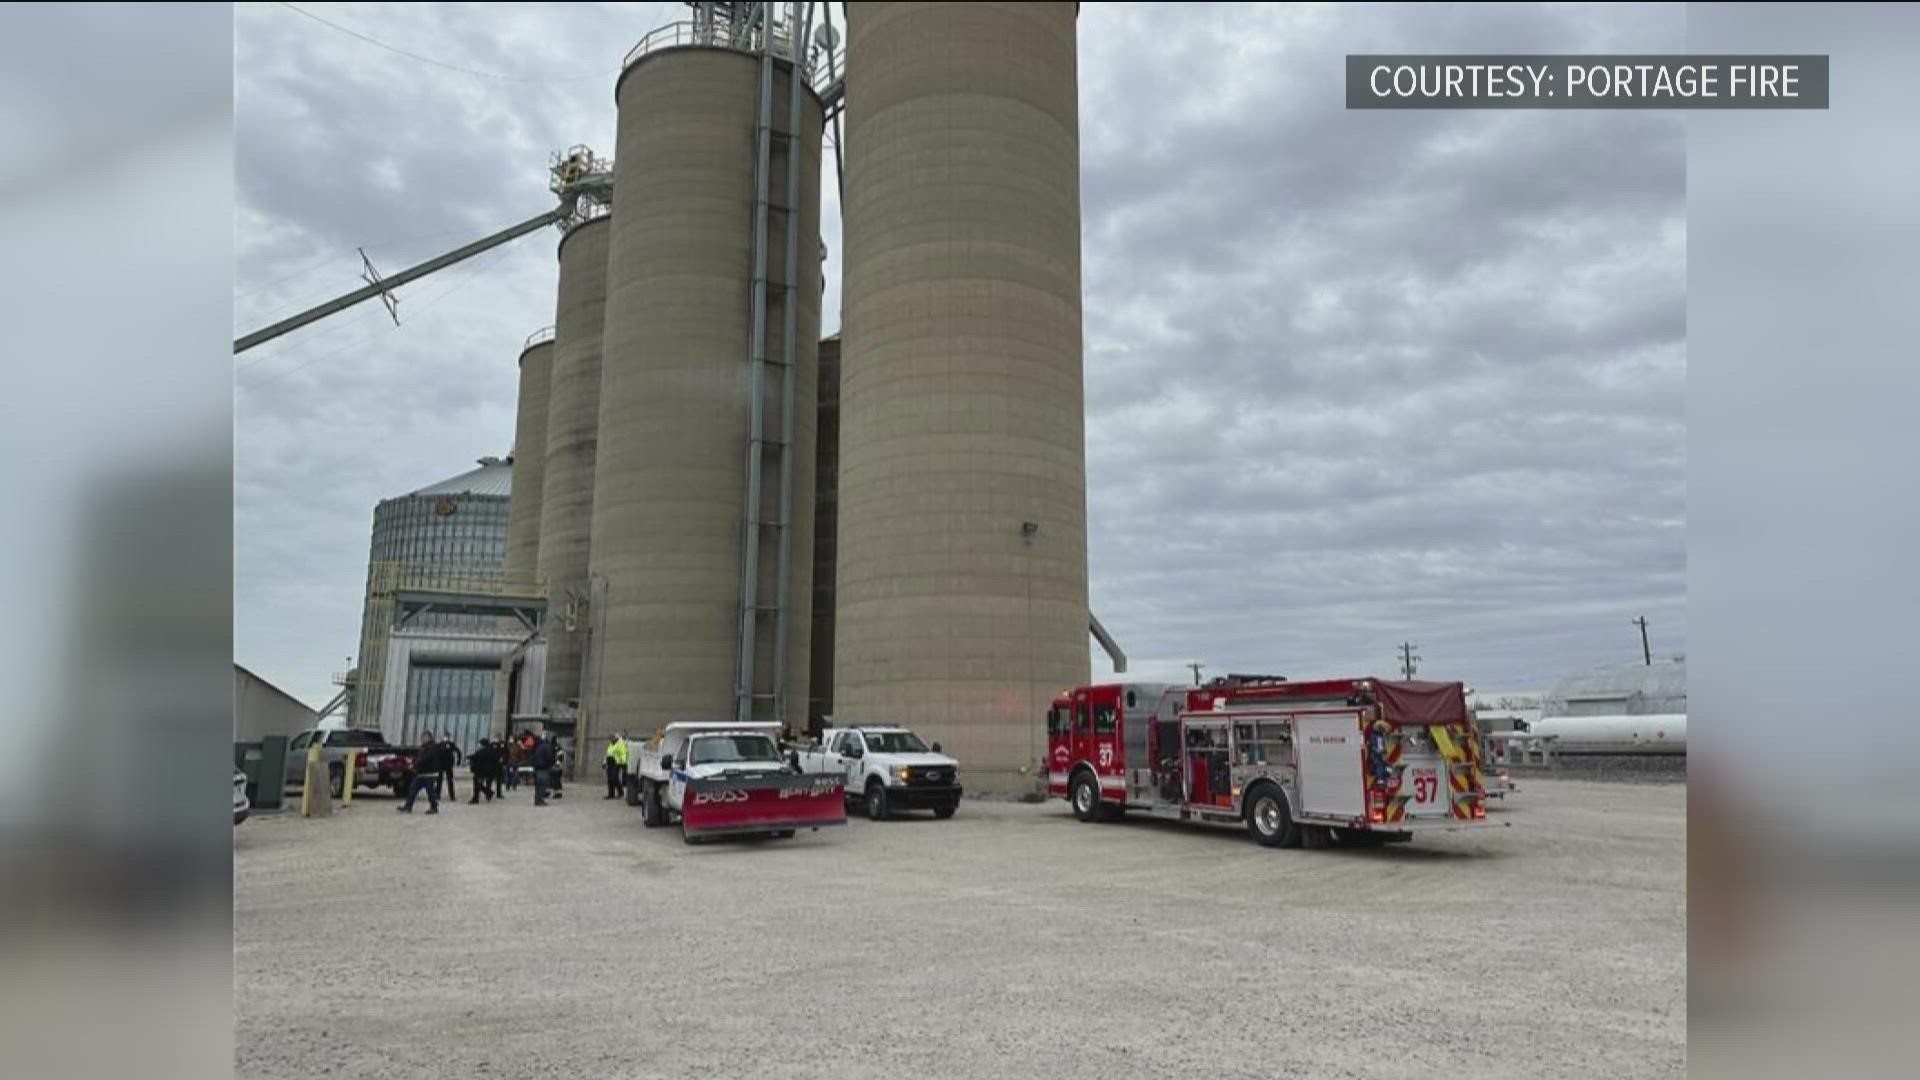 The man was saved in under 30 minutes after first responders were dispatched. Portage Fire District said they used a grain rescue tube obtained this year.